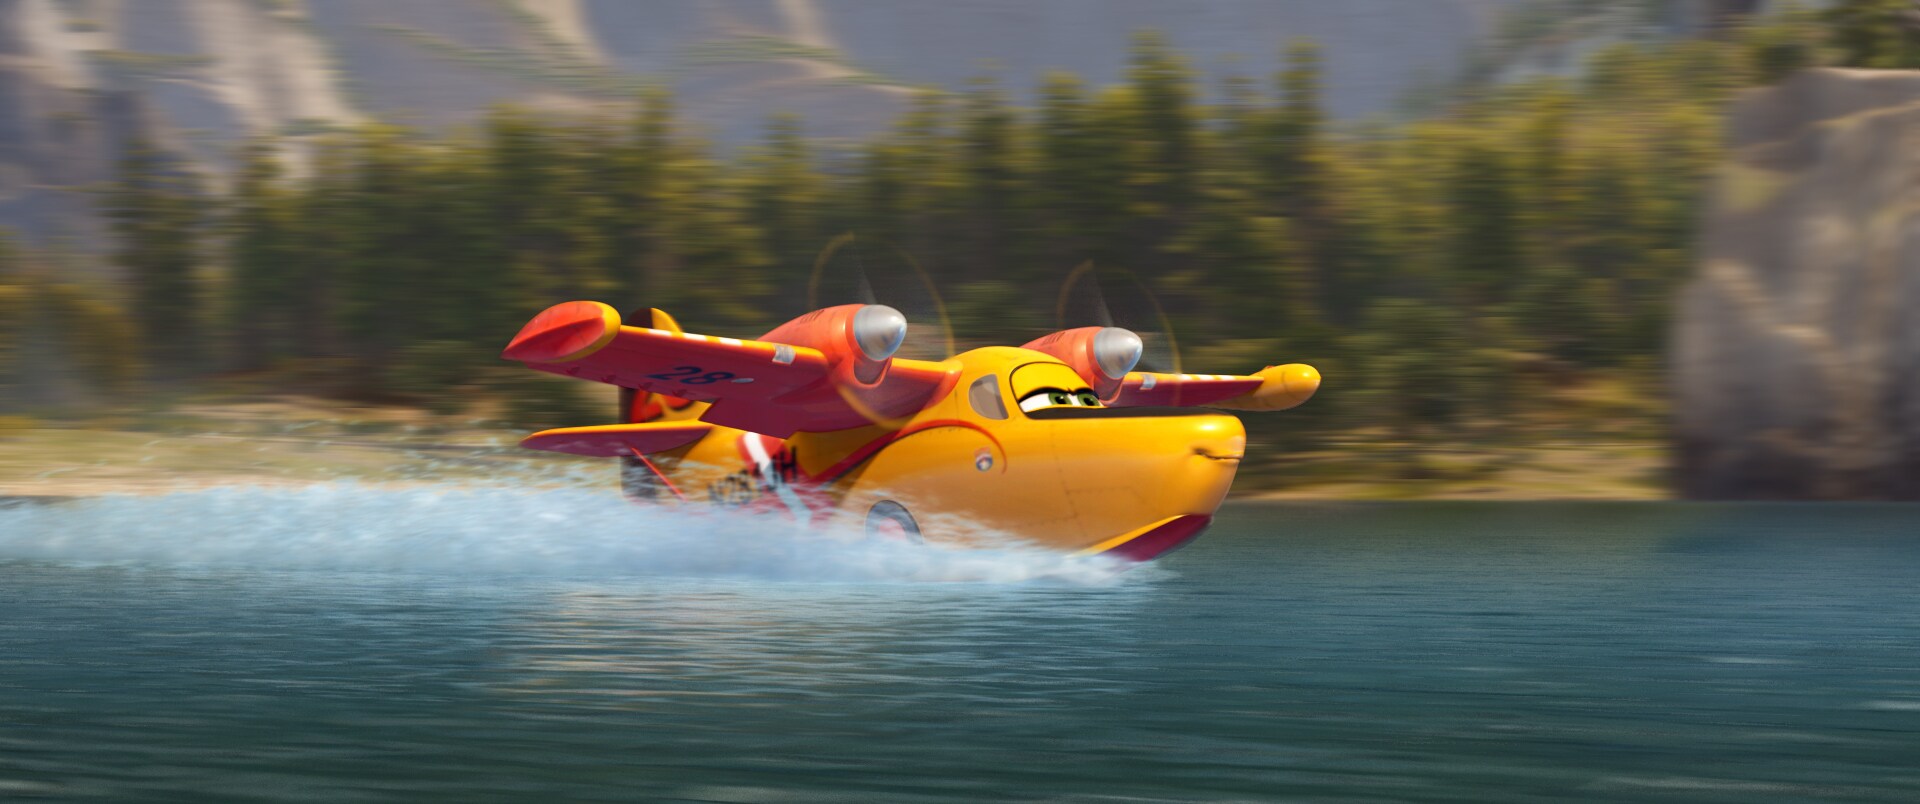 Lil Dipper (Julie Bowen) on a lake bed picking up water in "Planes: Fire & Rescue."